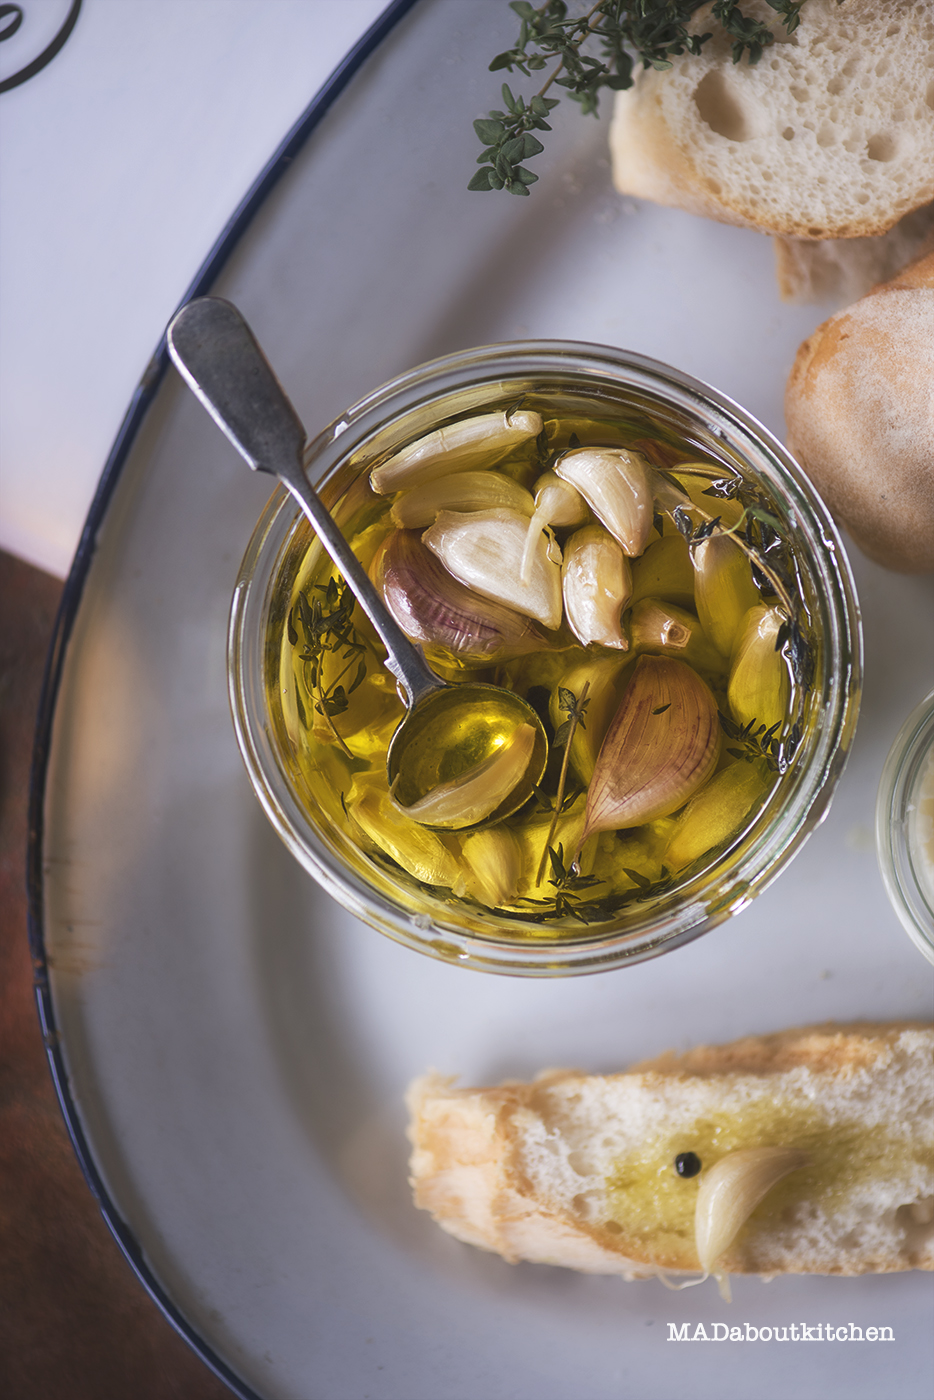 Confit Garlic is nothing but garlic cloves slow cooked in oil along with herbs. This is a fool proof recipe for a flavourful condiment that can be added to lot of dishes, spread, salad and butter or just have it along with some rustic bread.